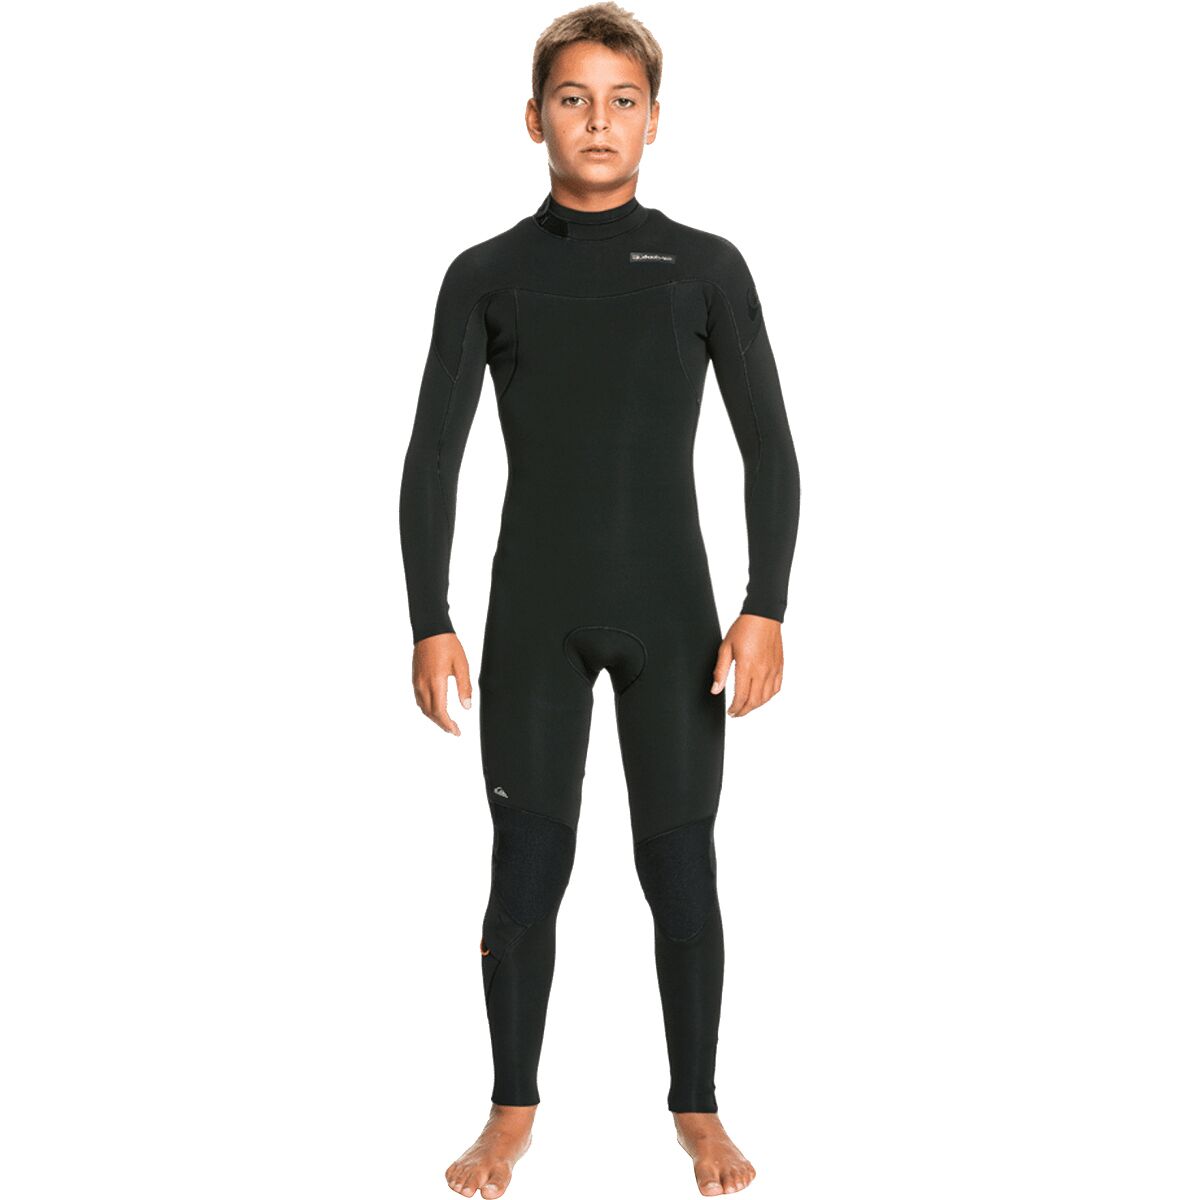 Quiksilver 3/2 Everyday Sessions Back-Zip Wetsuit - Boys'